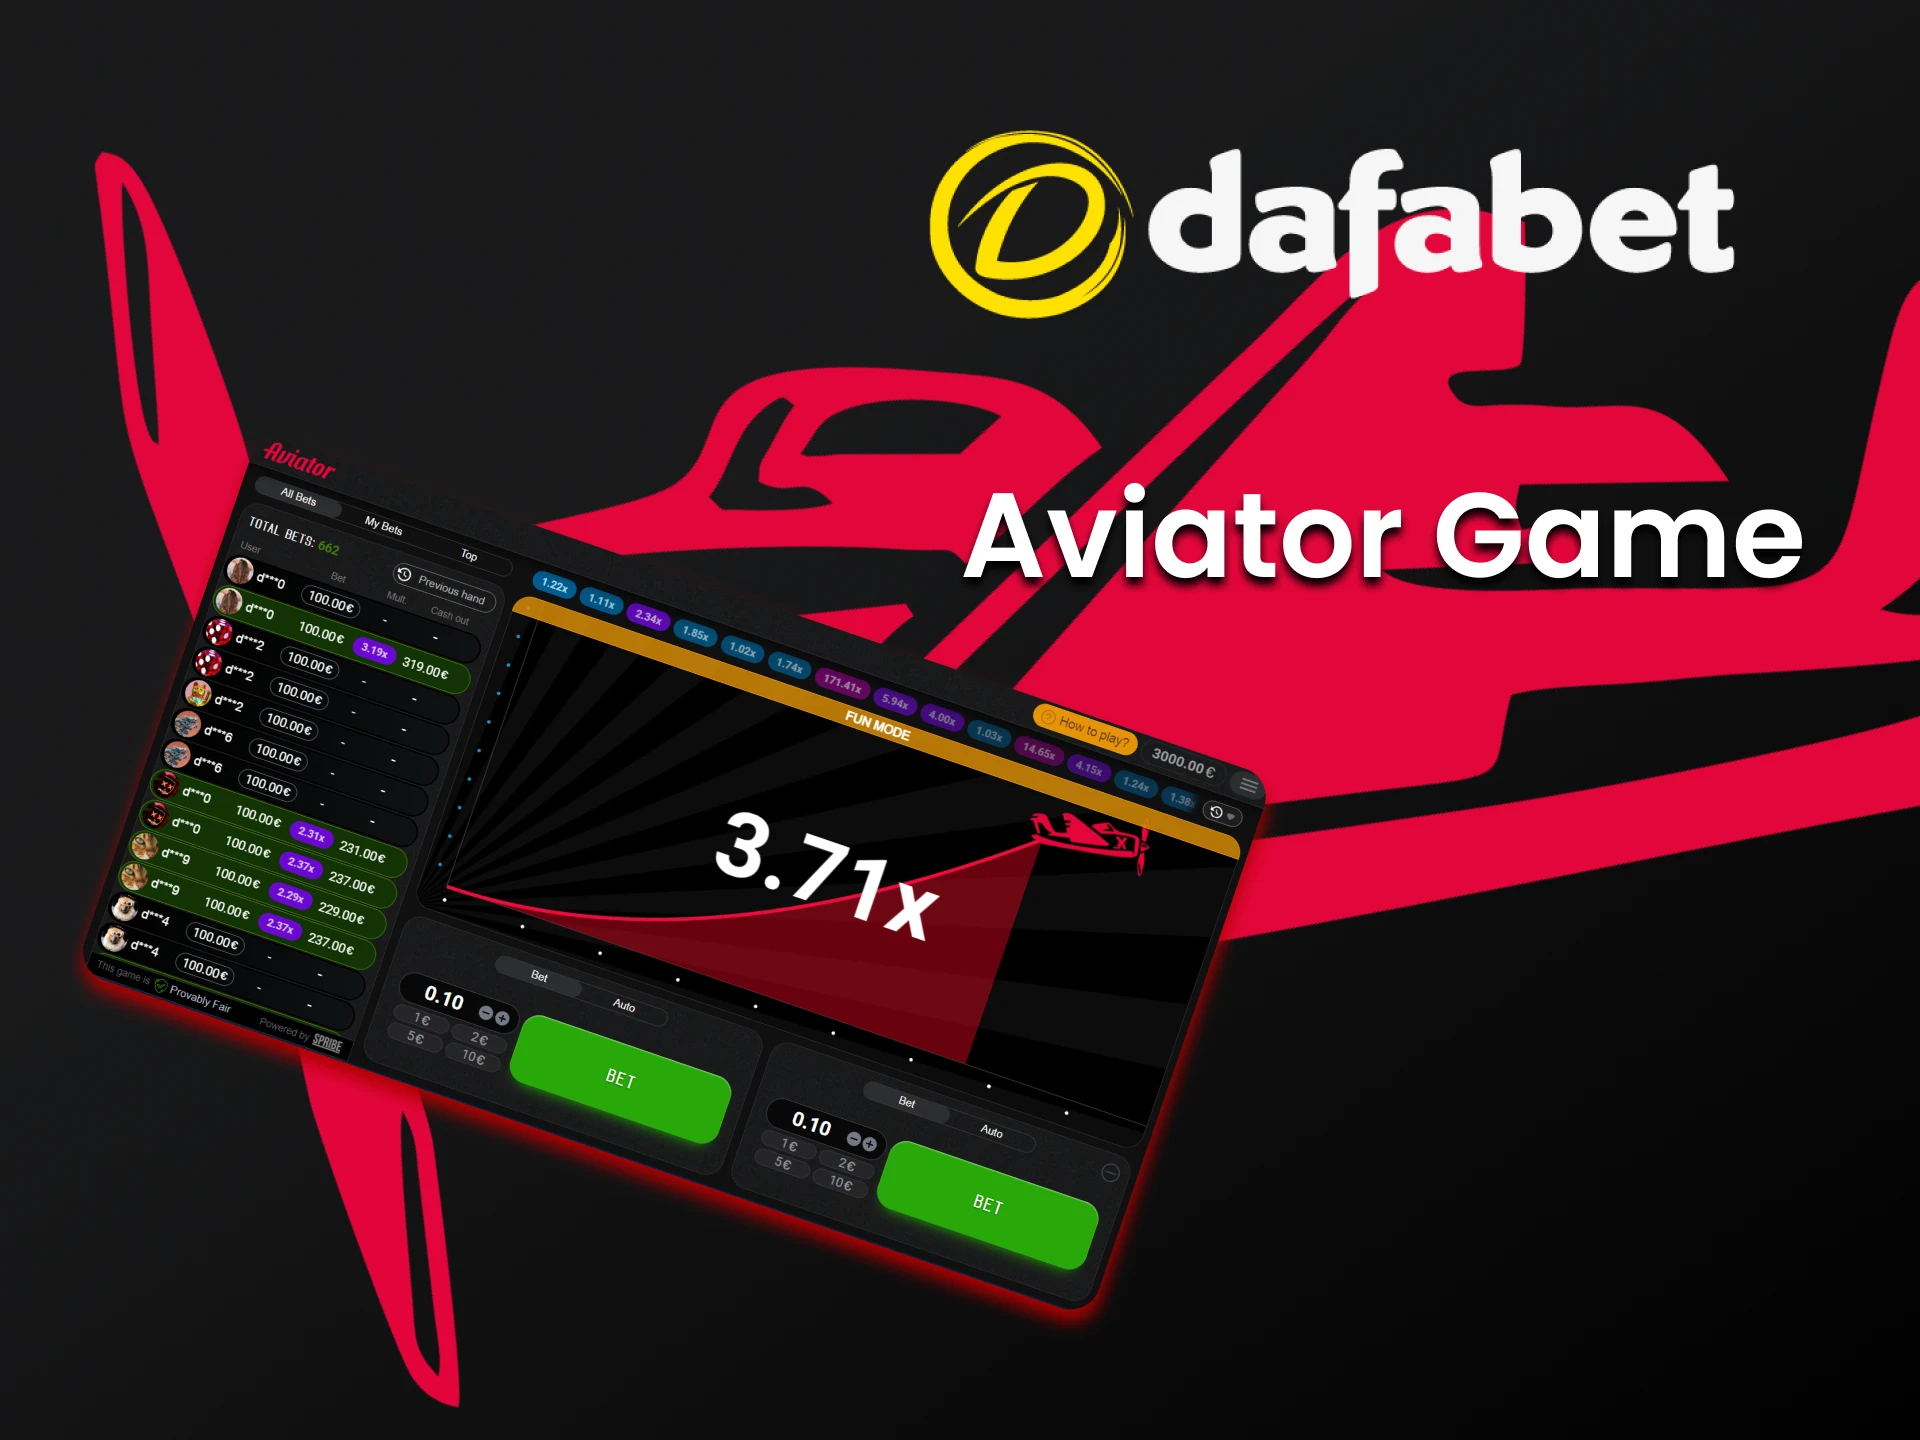 Have a good time playing Aviator with Dafabet.